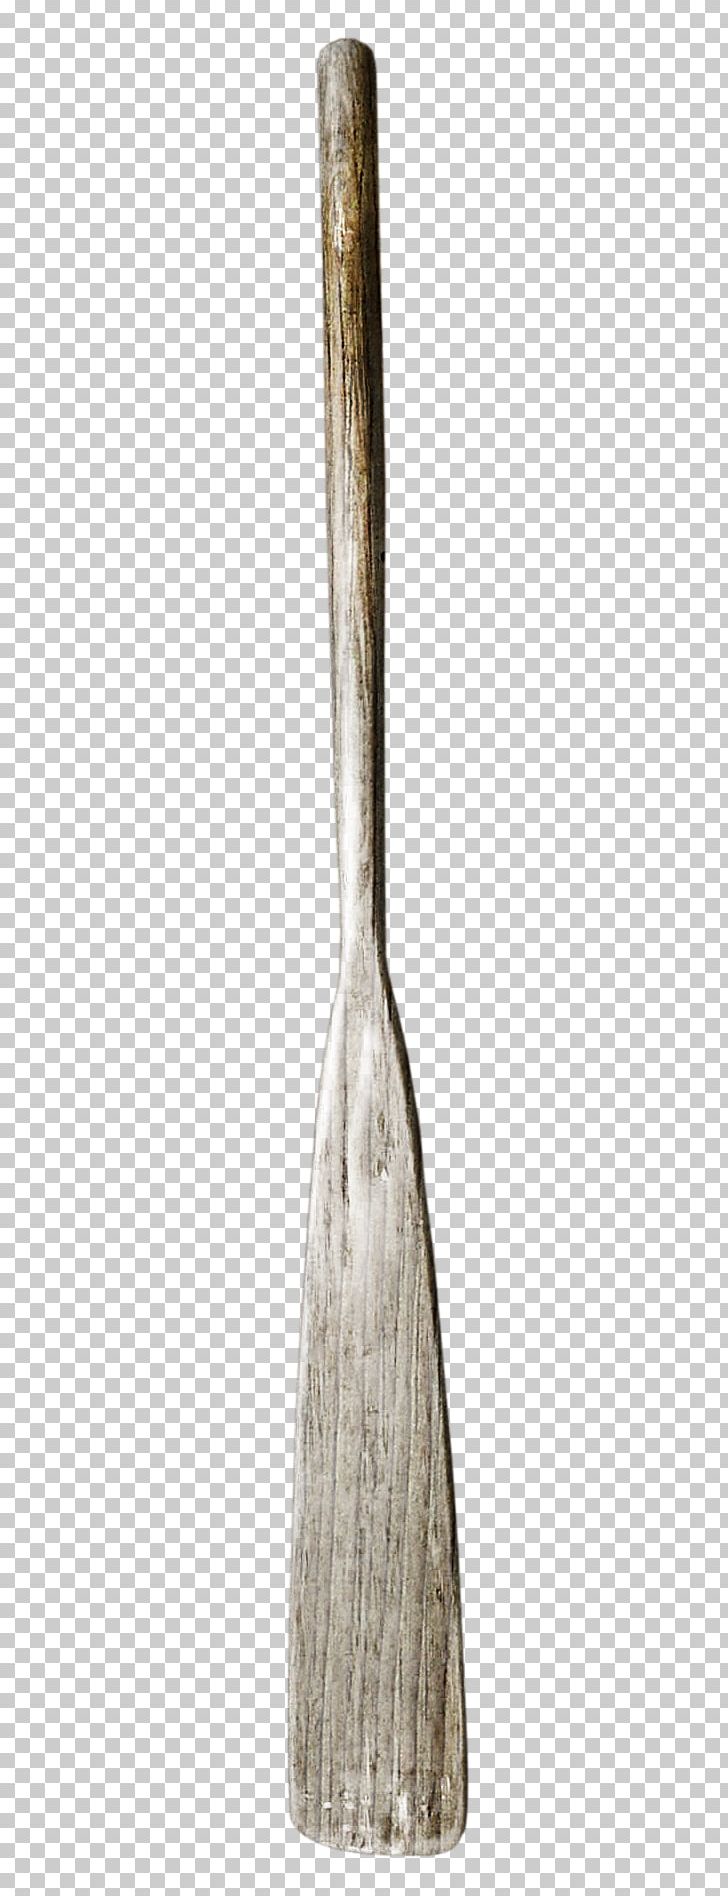 Oar Paddle Watercraft PNG, Clipart, Boating, Boat Paddle, Boat Supplies, Encapsulated Postscript, Paddle Ping Pong Computer Game Free PNG Download